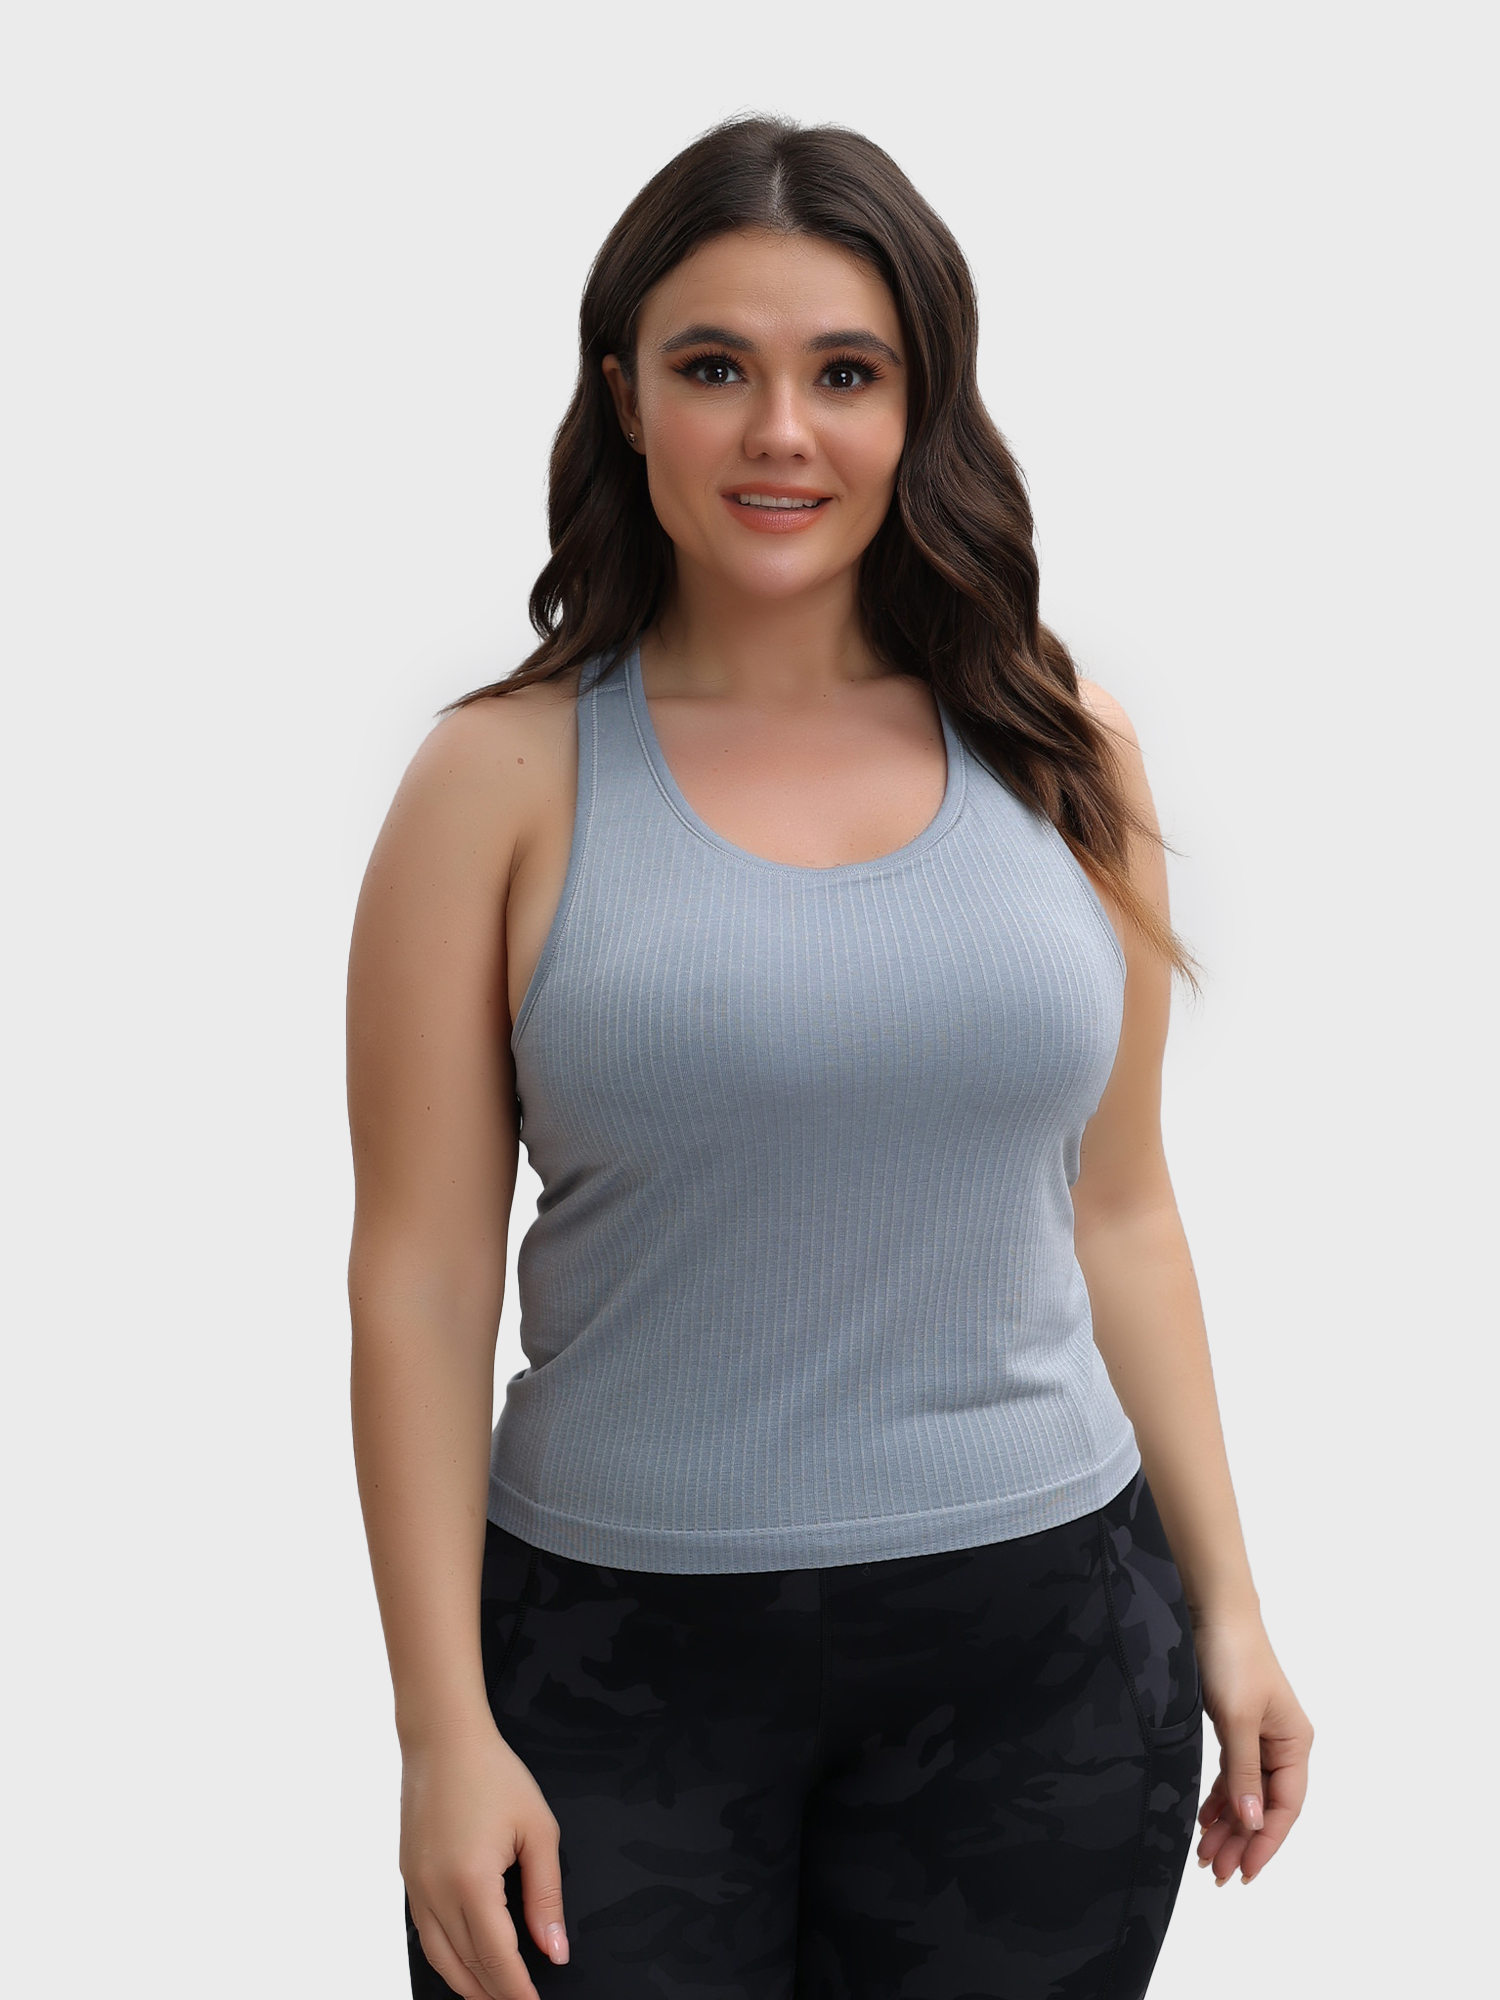 Ribbed Sexy Tank Top Sports Vest